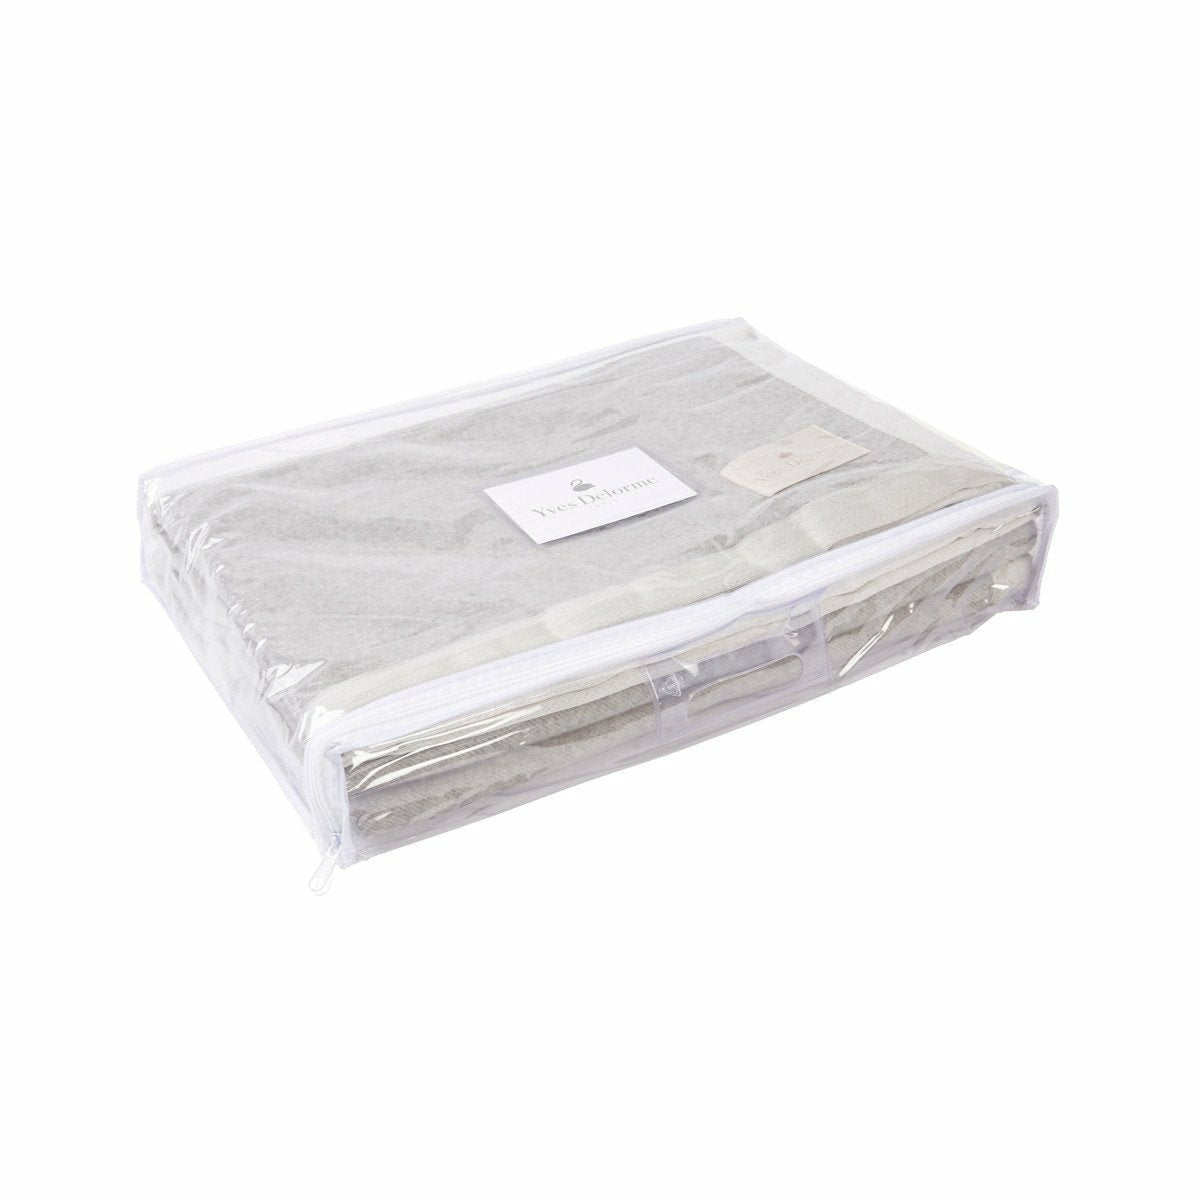 Yves Delorme Nymphe Blanket Packaging Silver Fine Linens